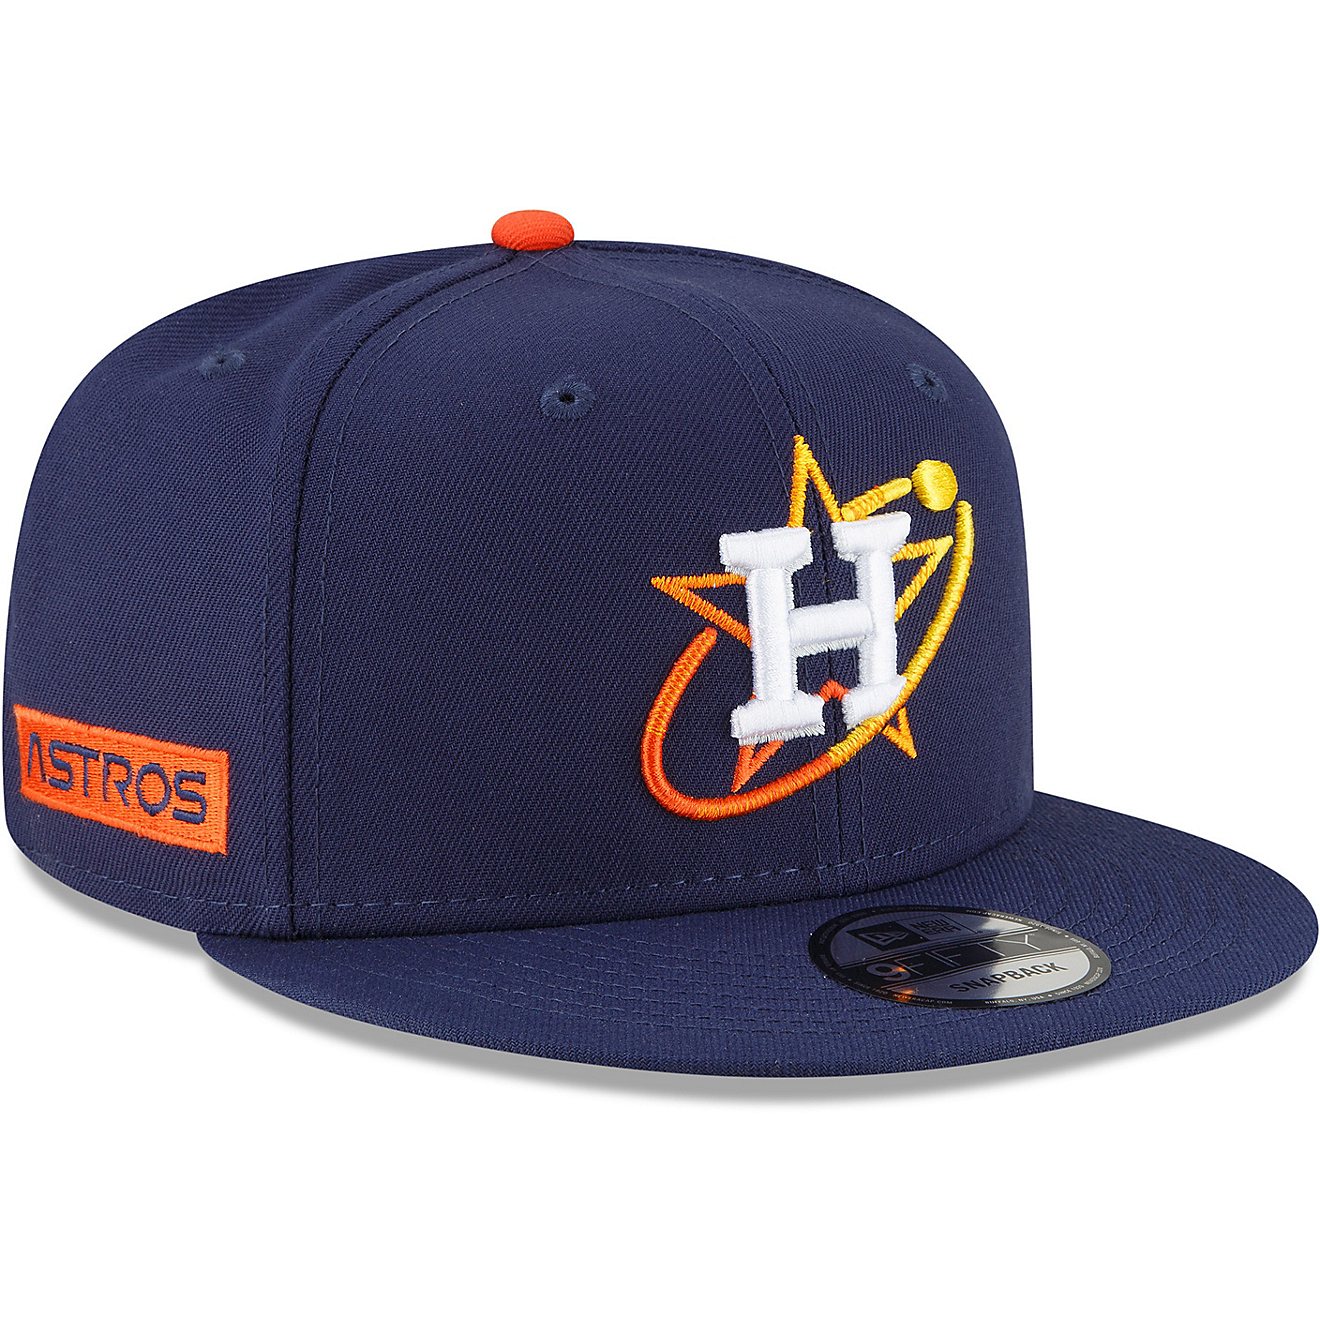 New Era Men's Houston Astros City Connect 9FIFTY Cap                                                                             - view number 4